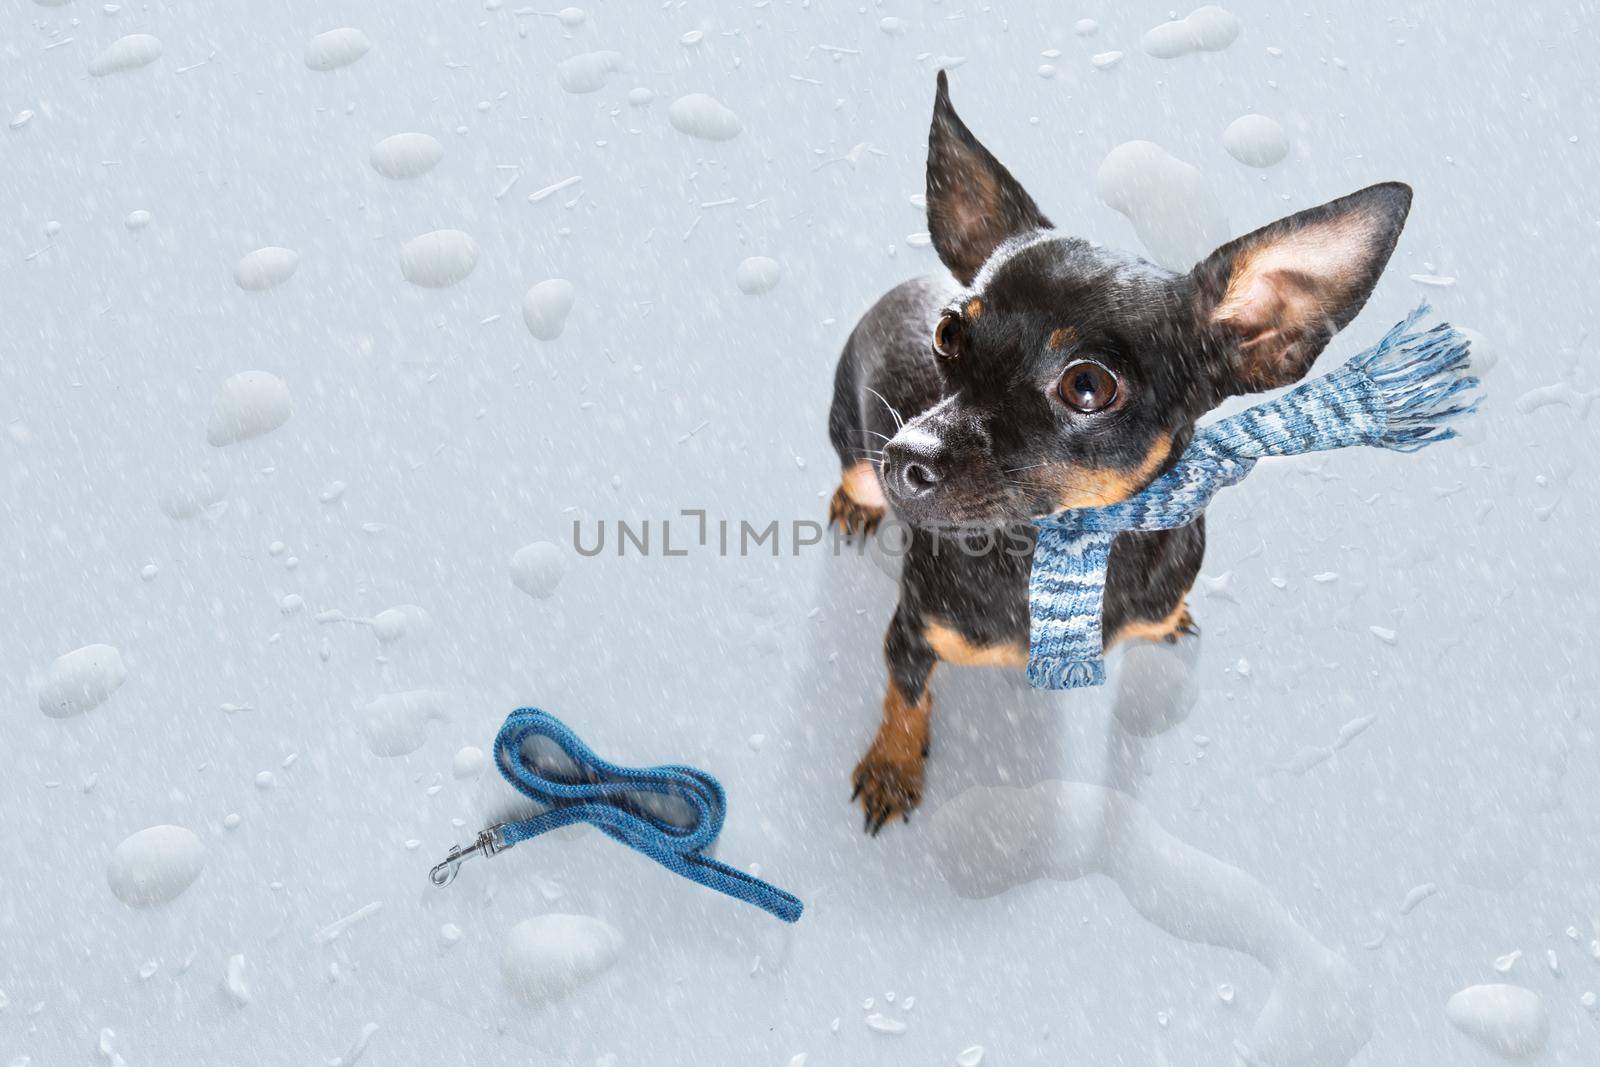 bad weather rain and snow dog by Brosch